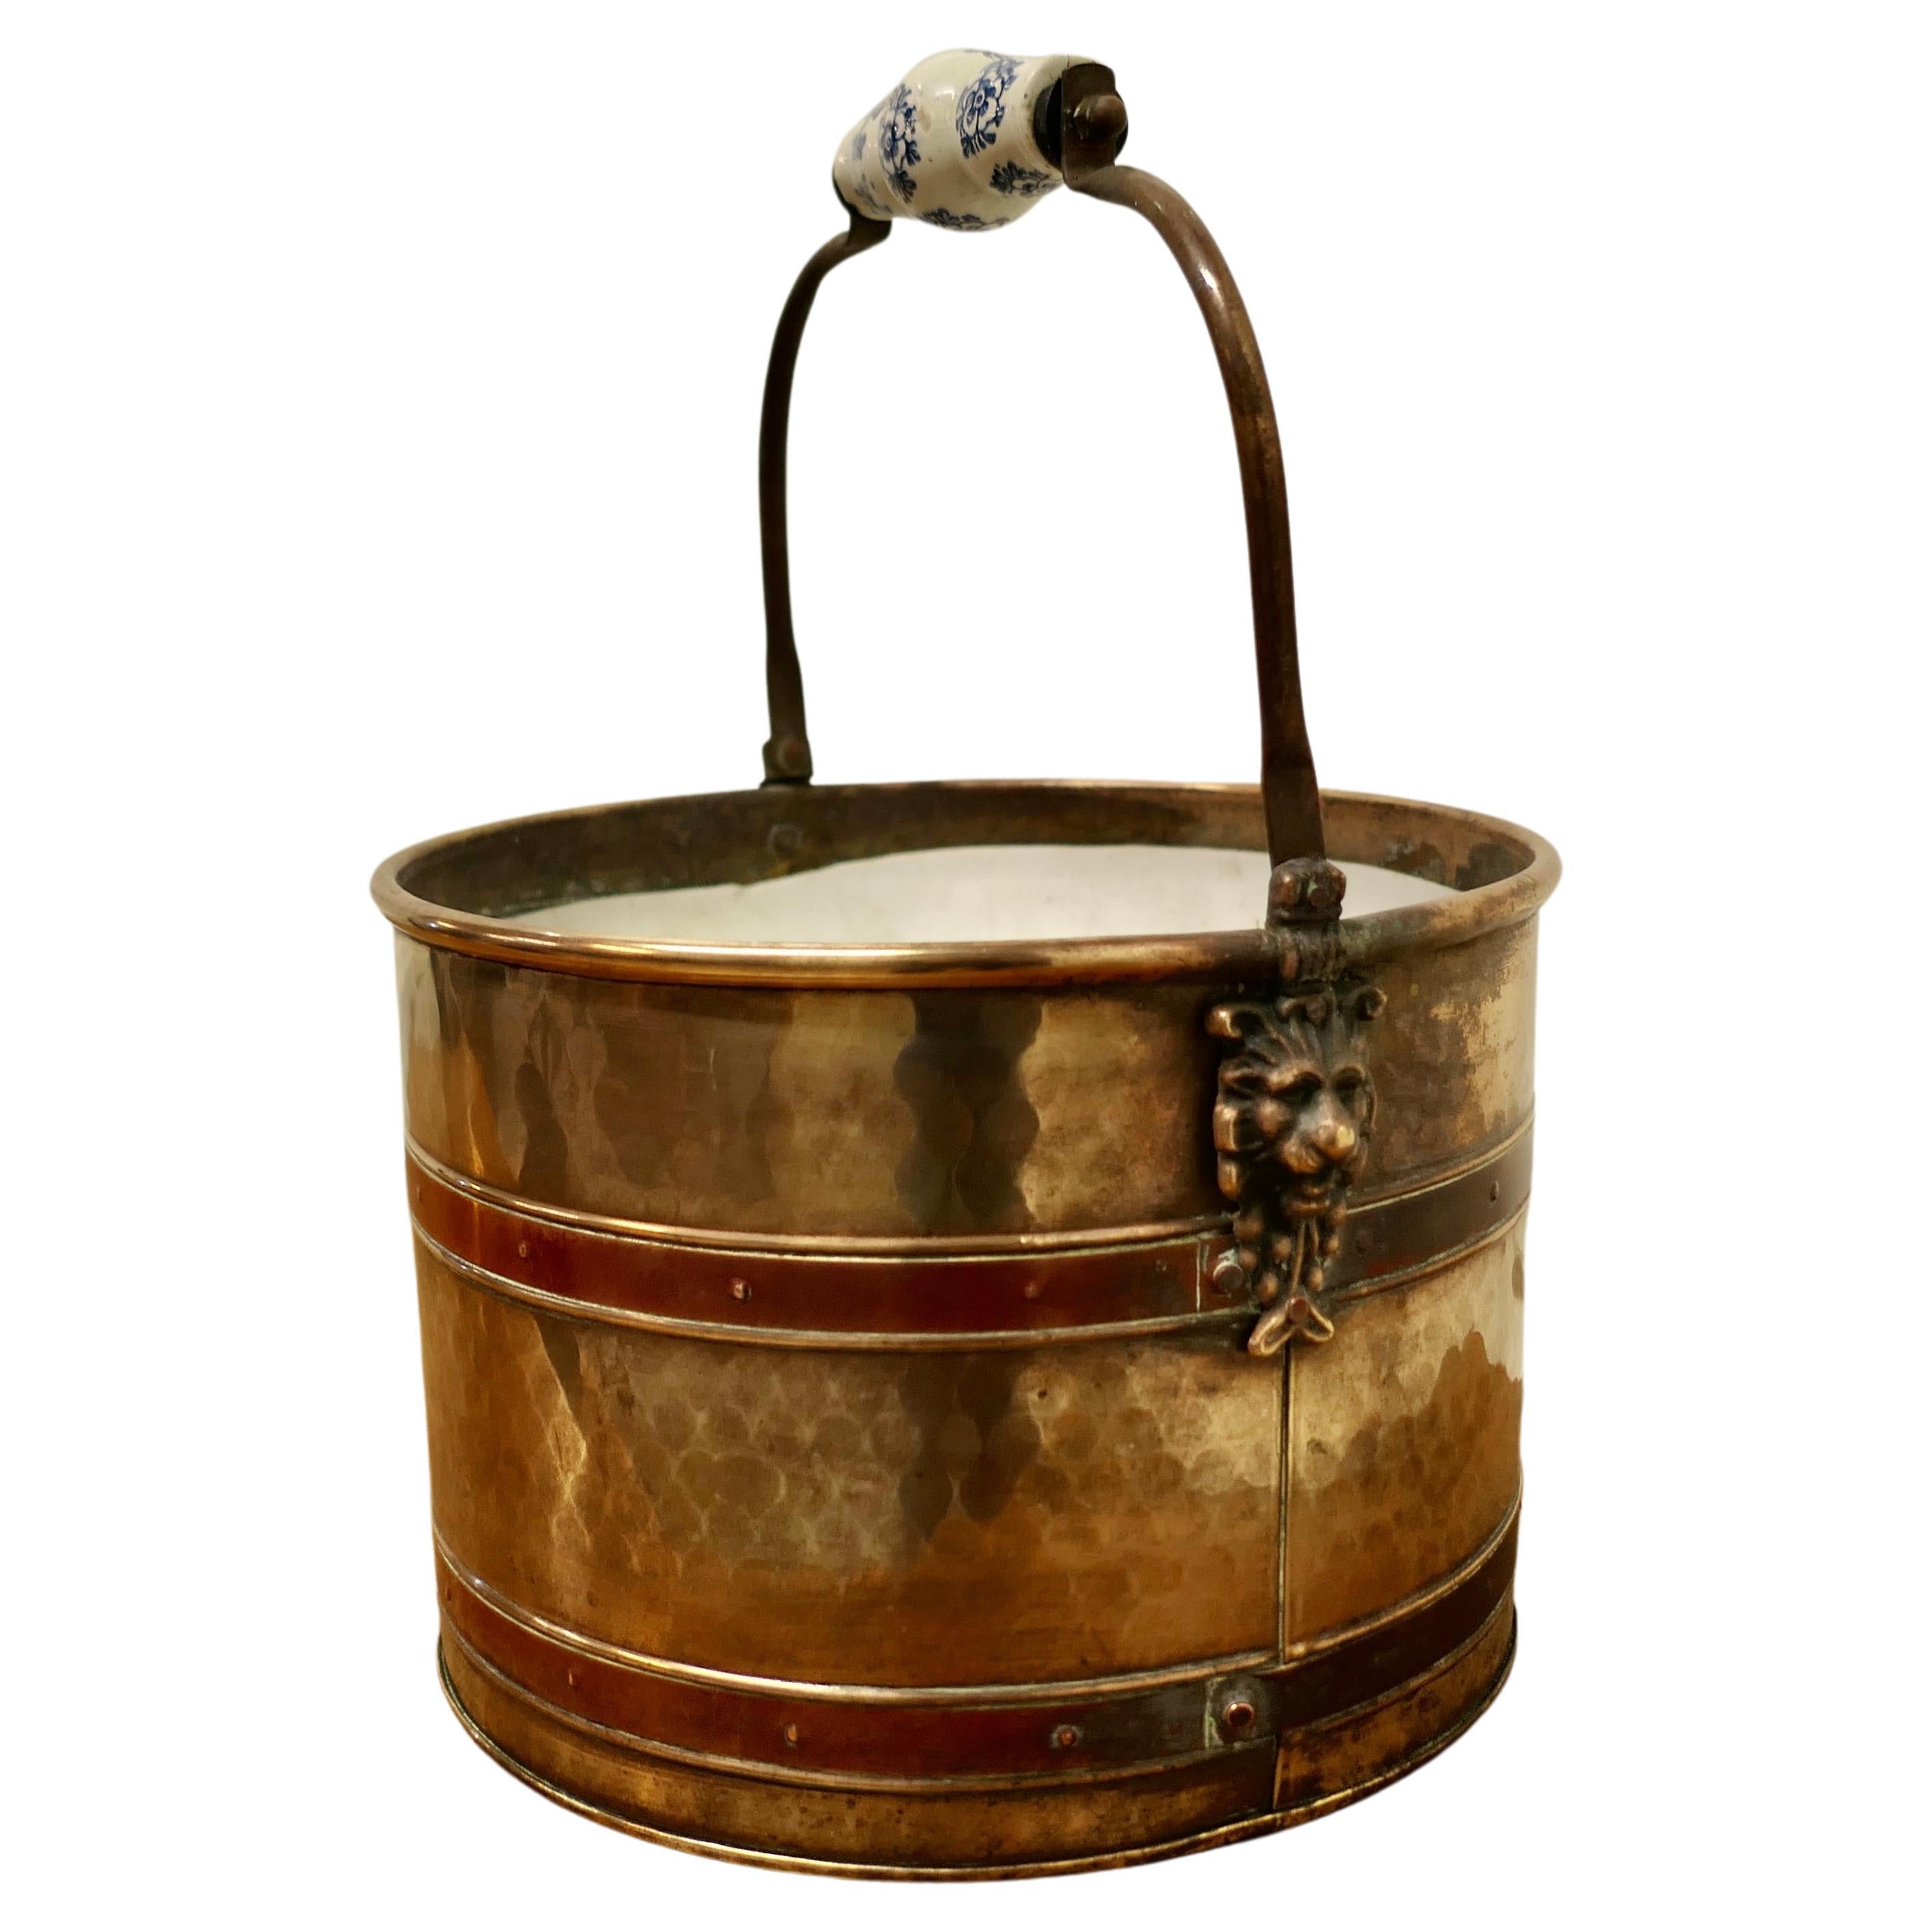 19th Century Copper and Brass Plant Pot Bucket or Wine Cooler